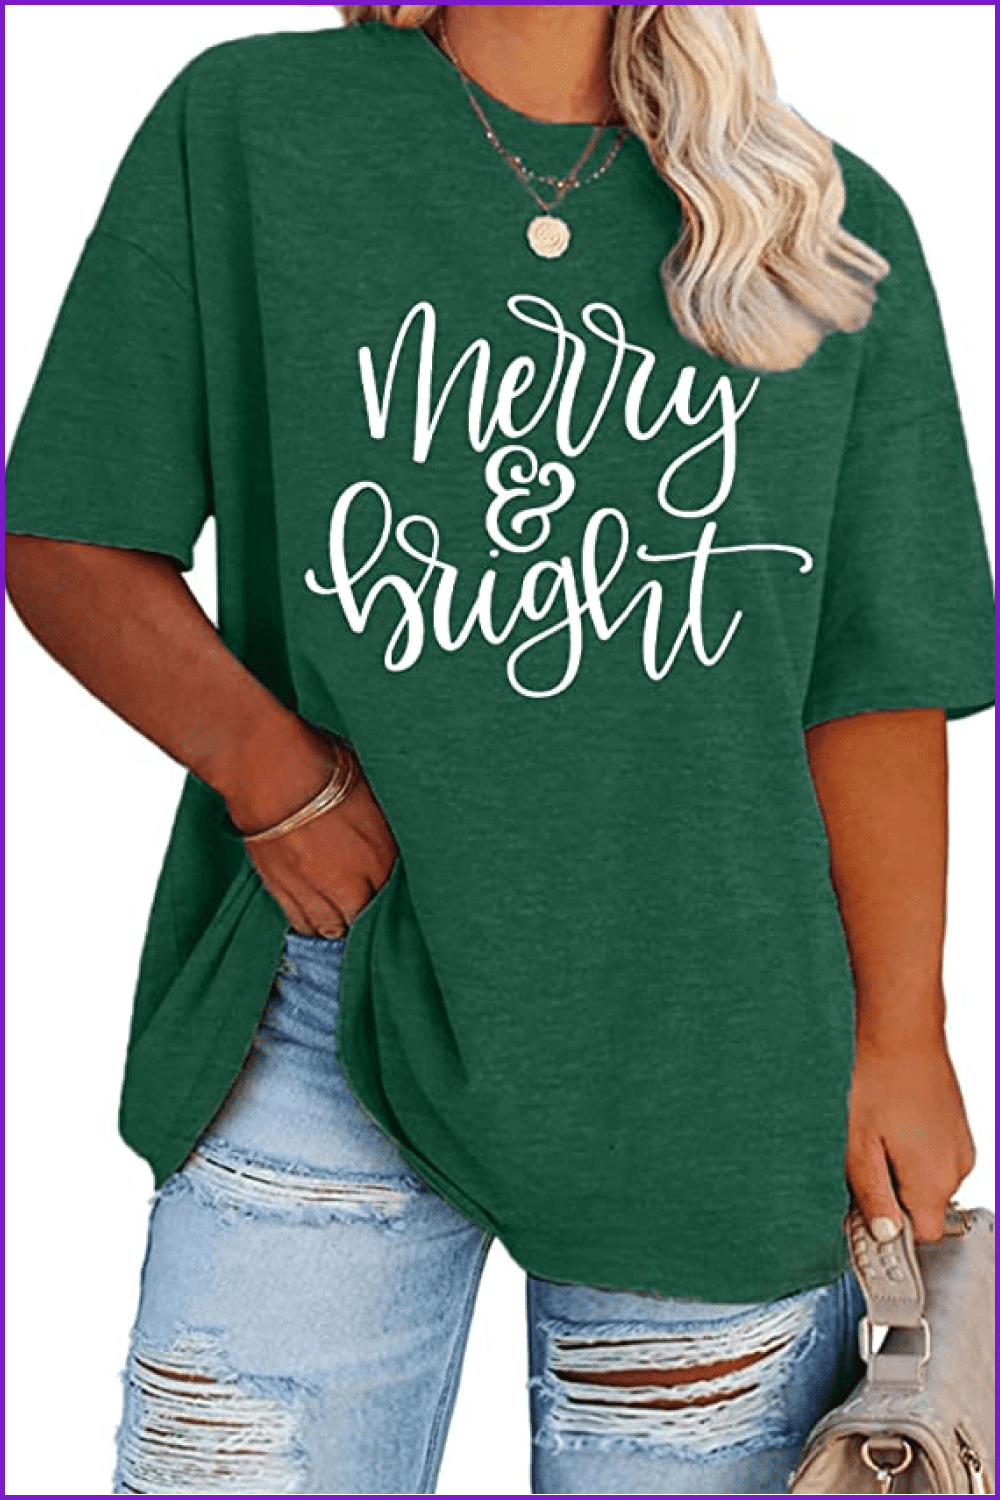 Plus Size Christmas Shirts, Plus Size Holiday Tops